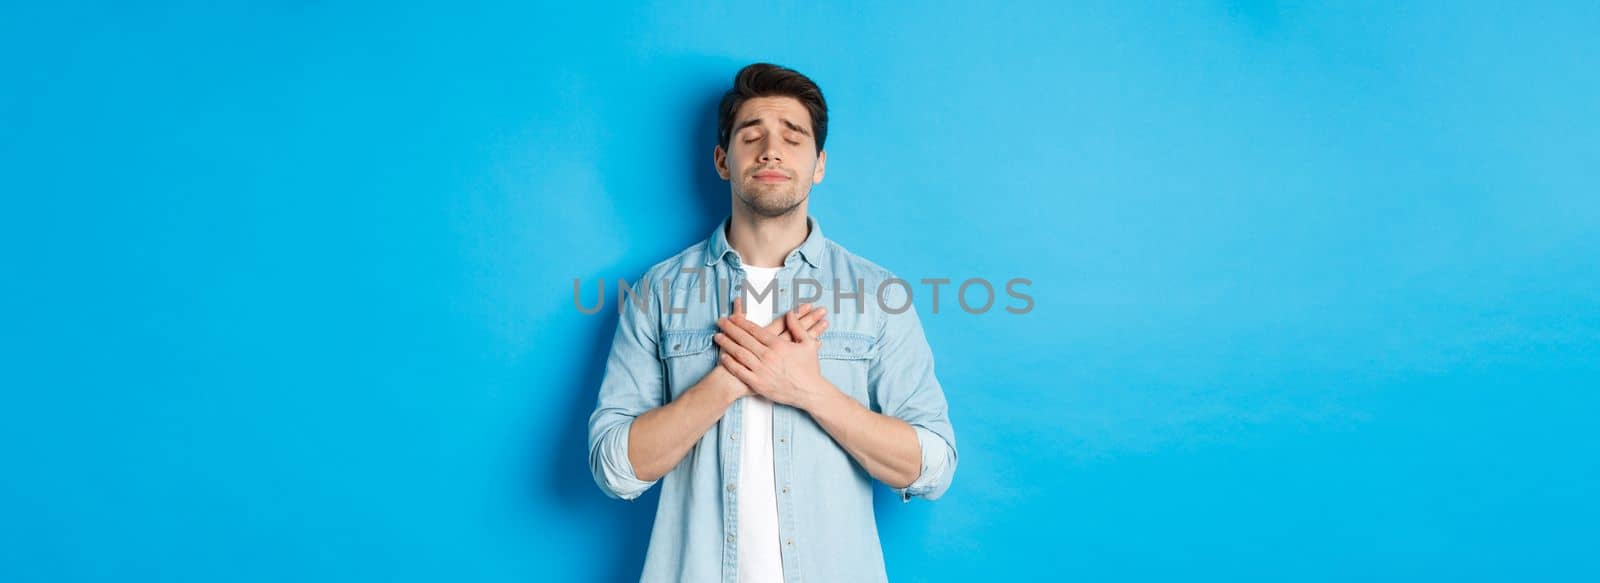 Portrait of dreamy and nostalgic guy in casual outfit, holding hands on heart and close eyes, daydreaming against blue background.